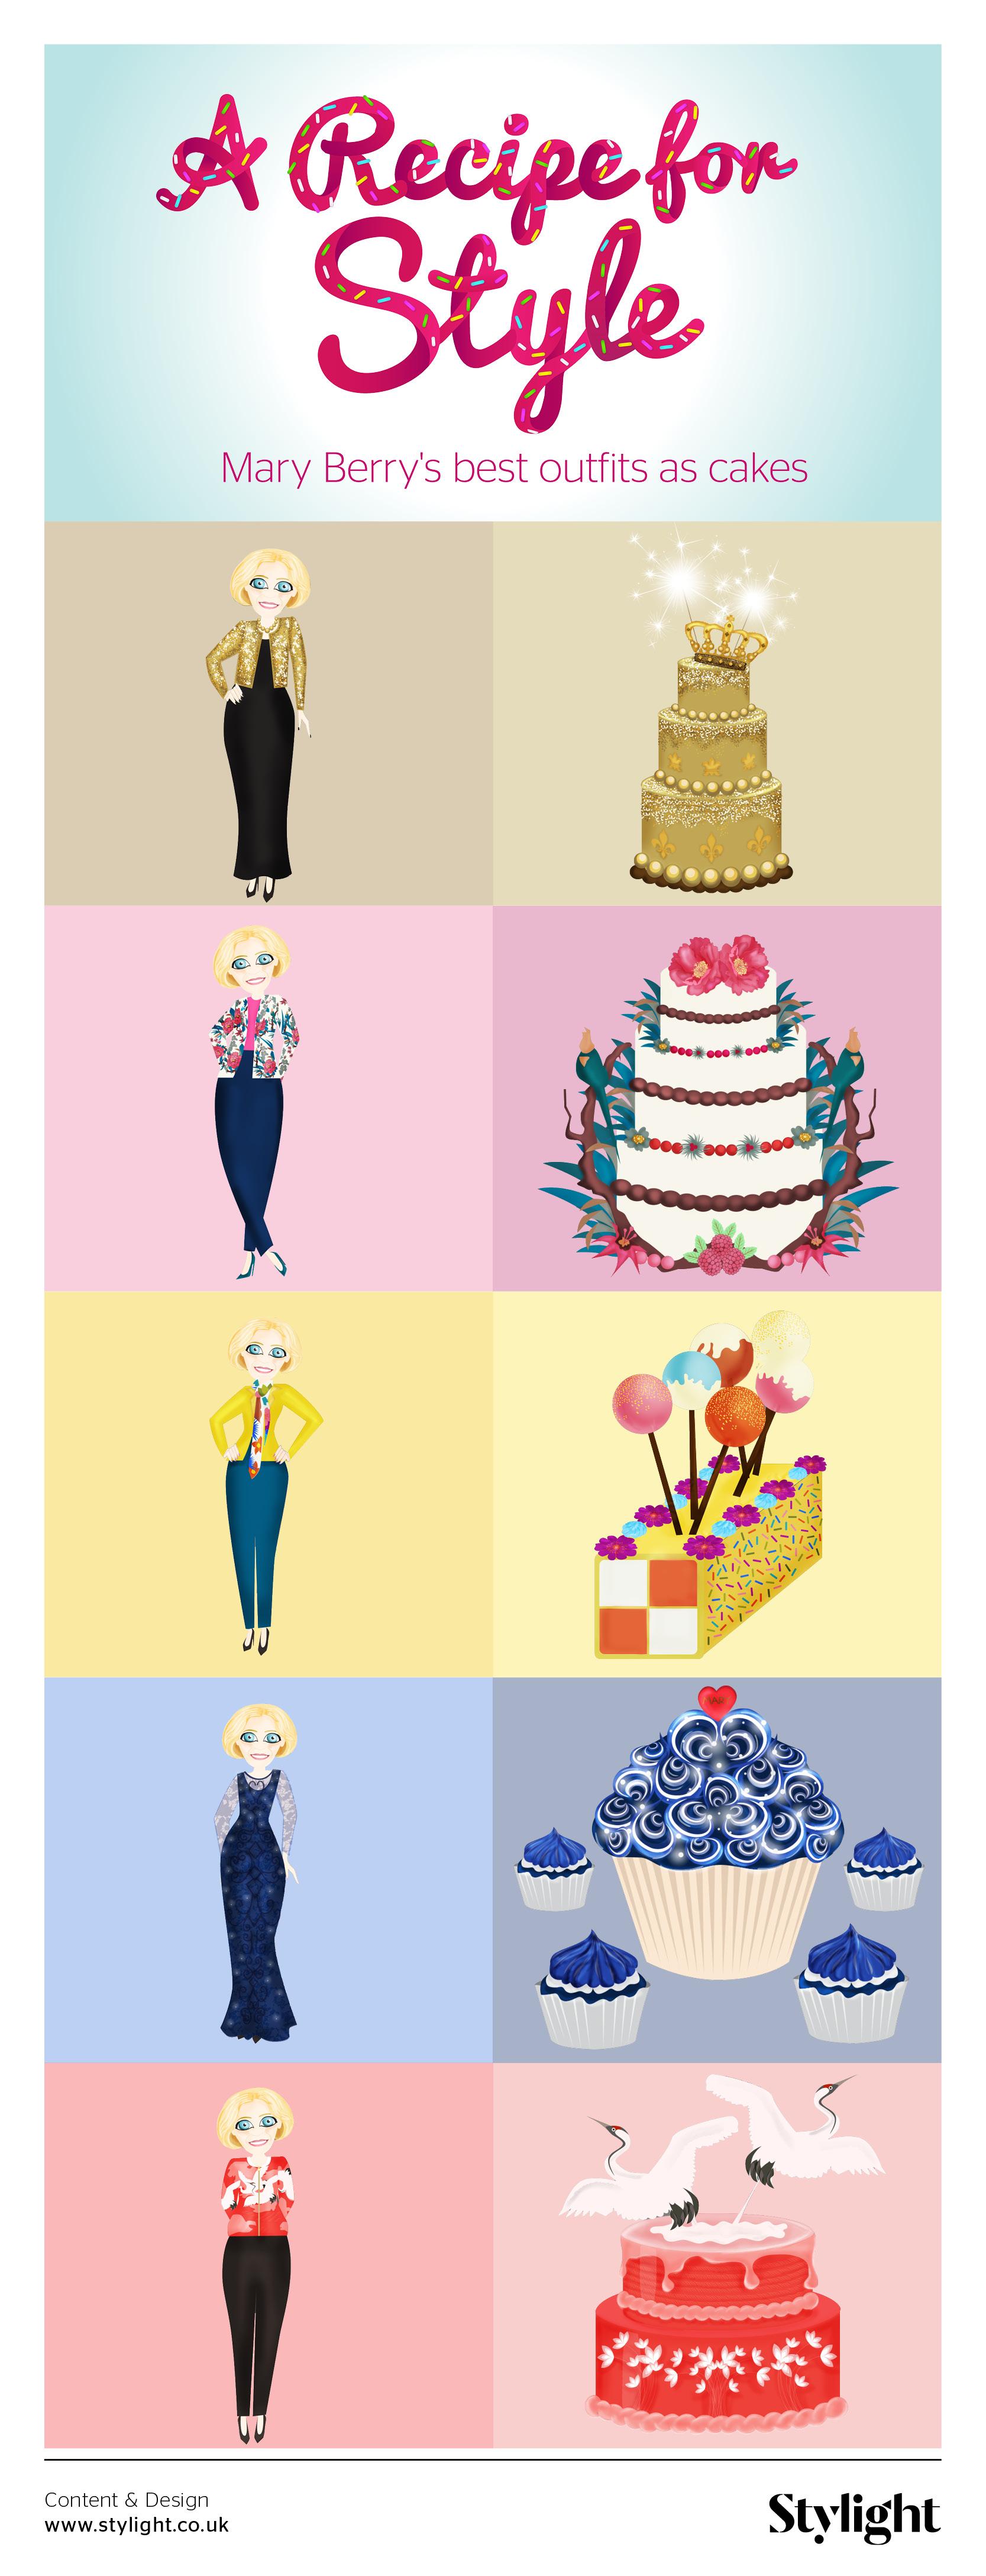 Mary Berry - A Recipe for Style - Infographic